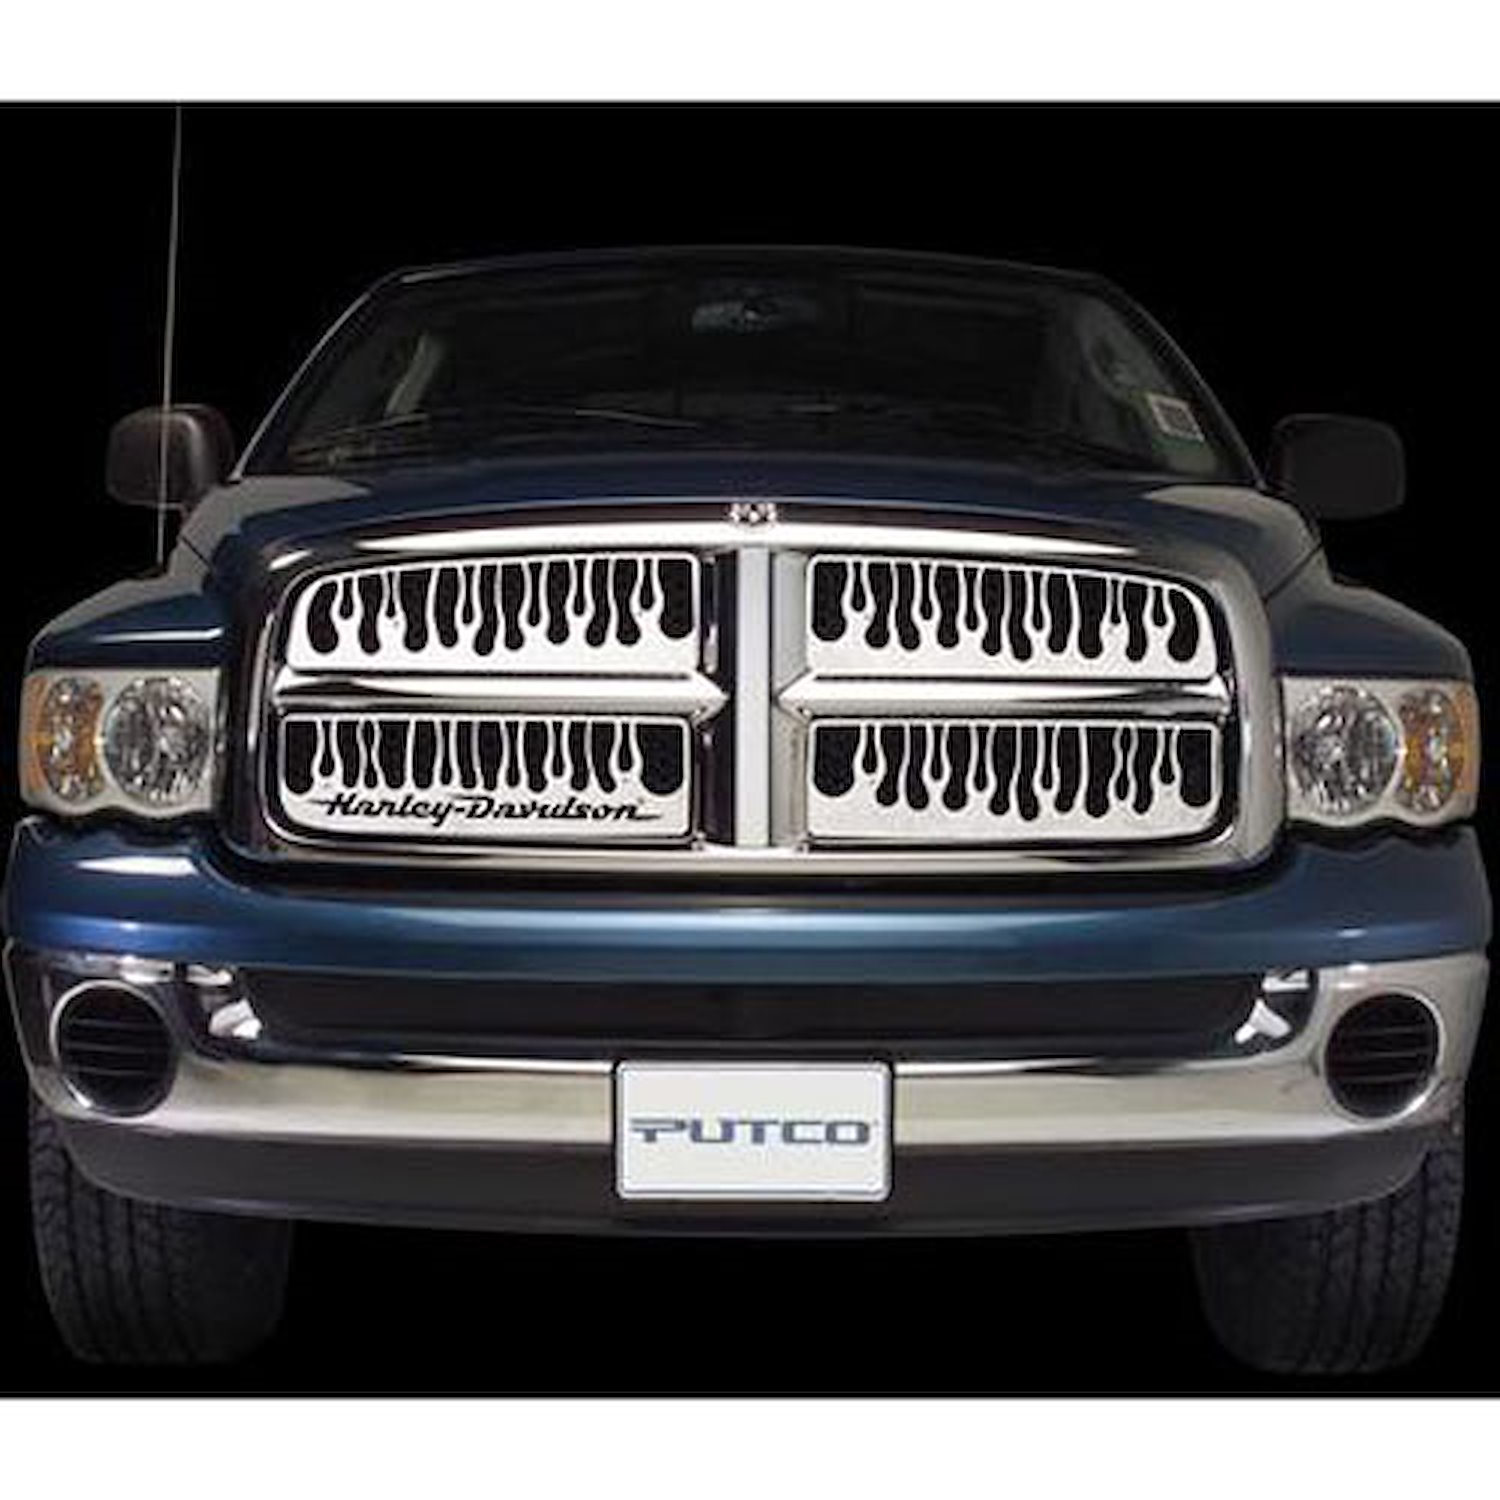 Ford Mustang GT Main Grille